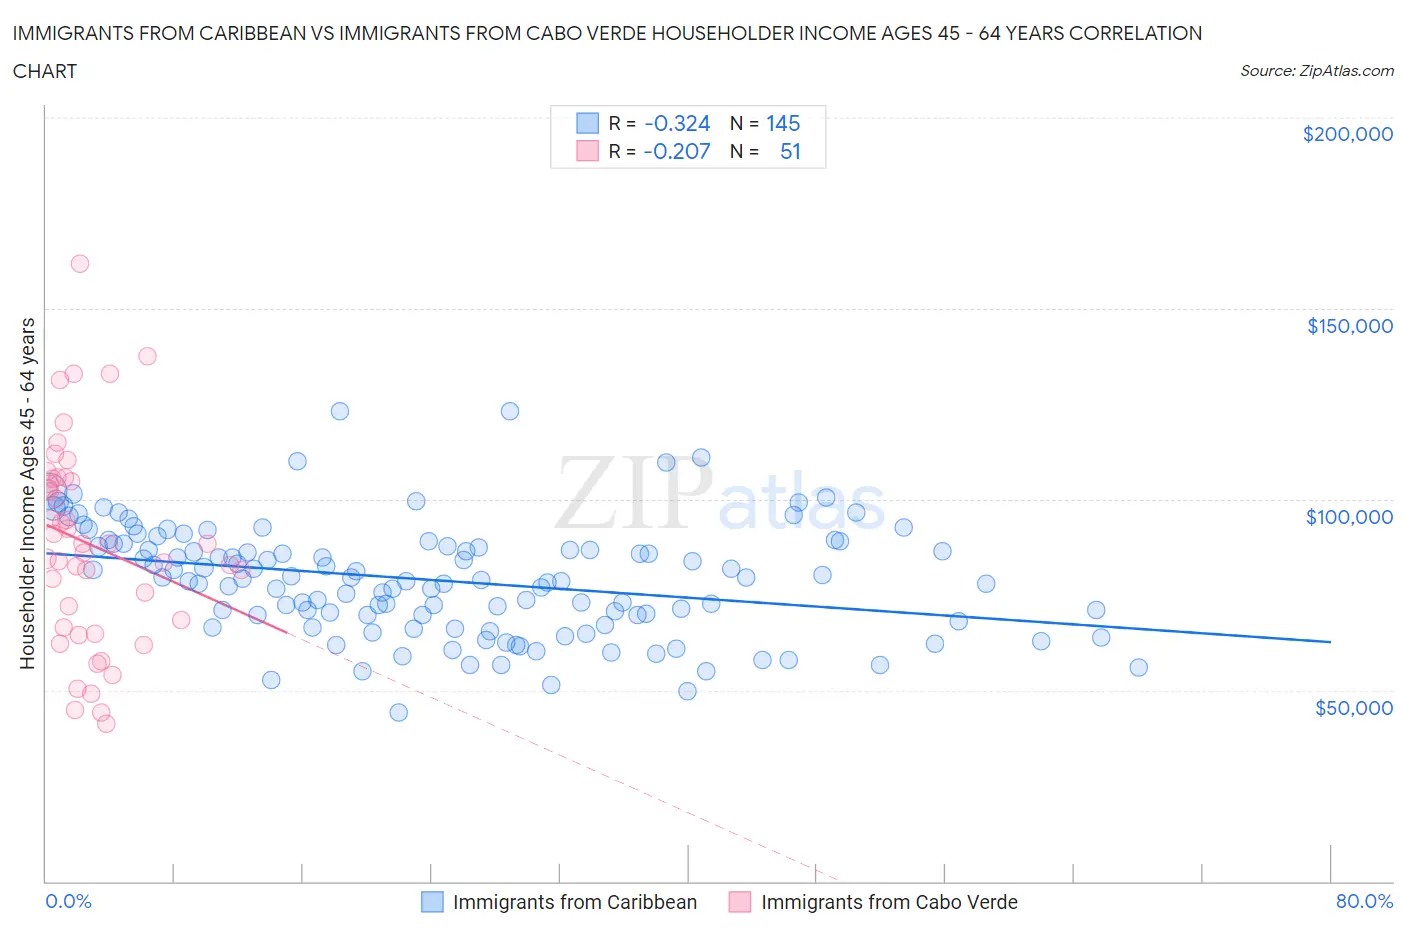 Immigrants from Caribbean vs Immigrants from Cabo Verde Householder Income Ages 45 - 64 years